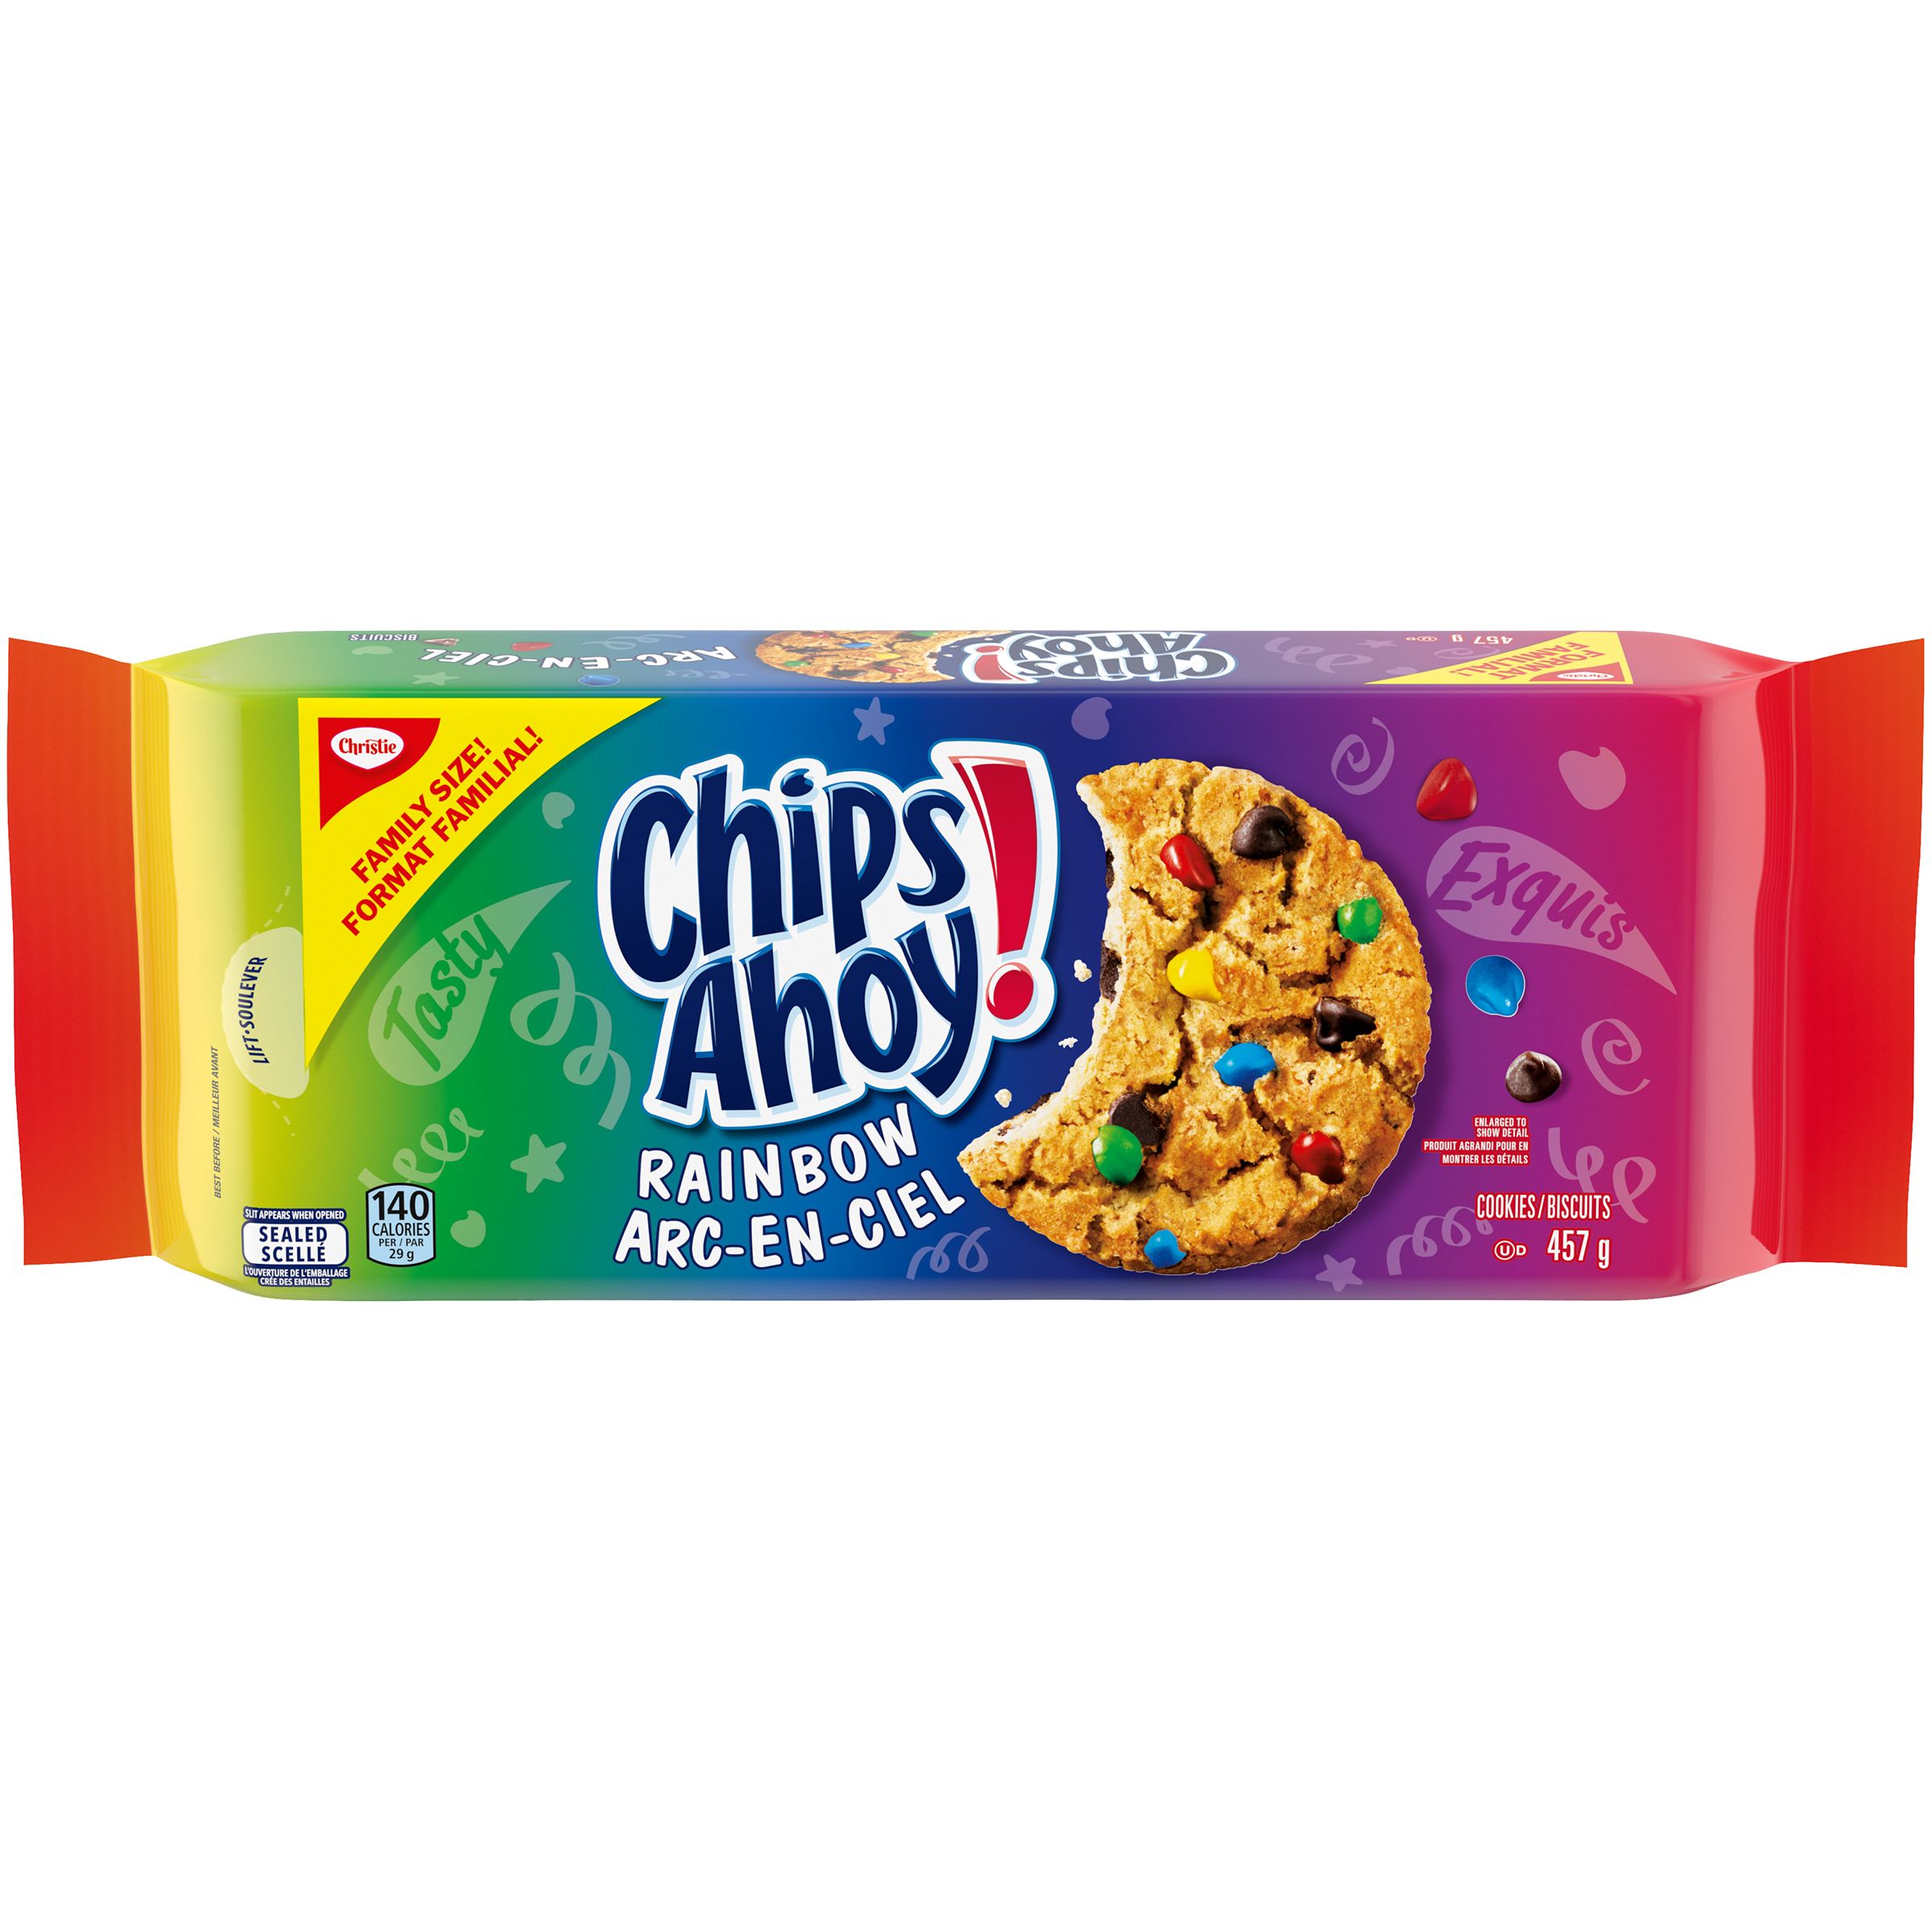 CHIPS AHOY! Rainbow Chocolate Chip Cookies, 1 Family Resealable Pack (457g)